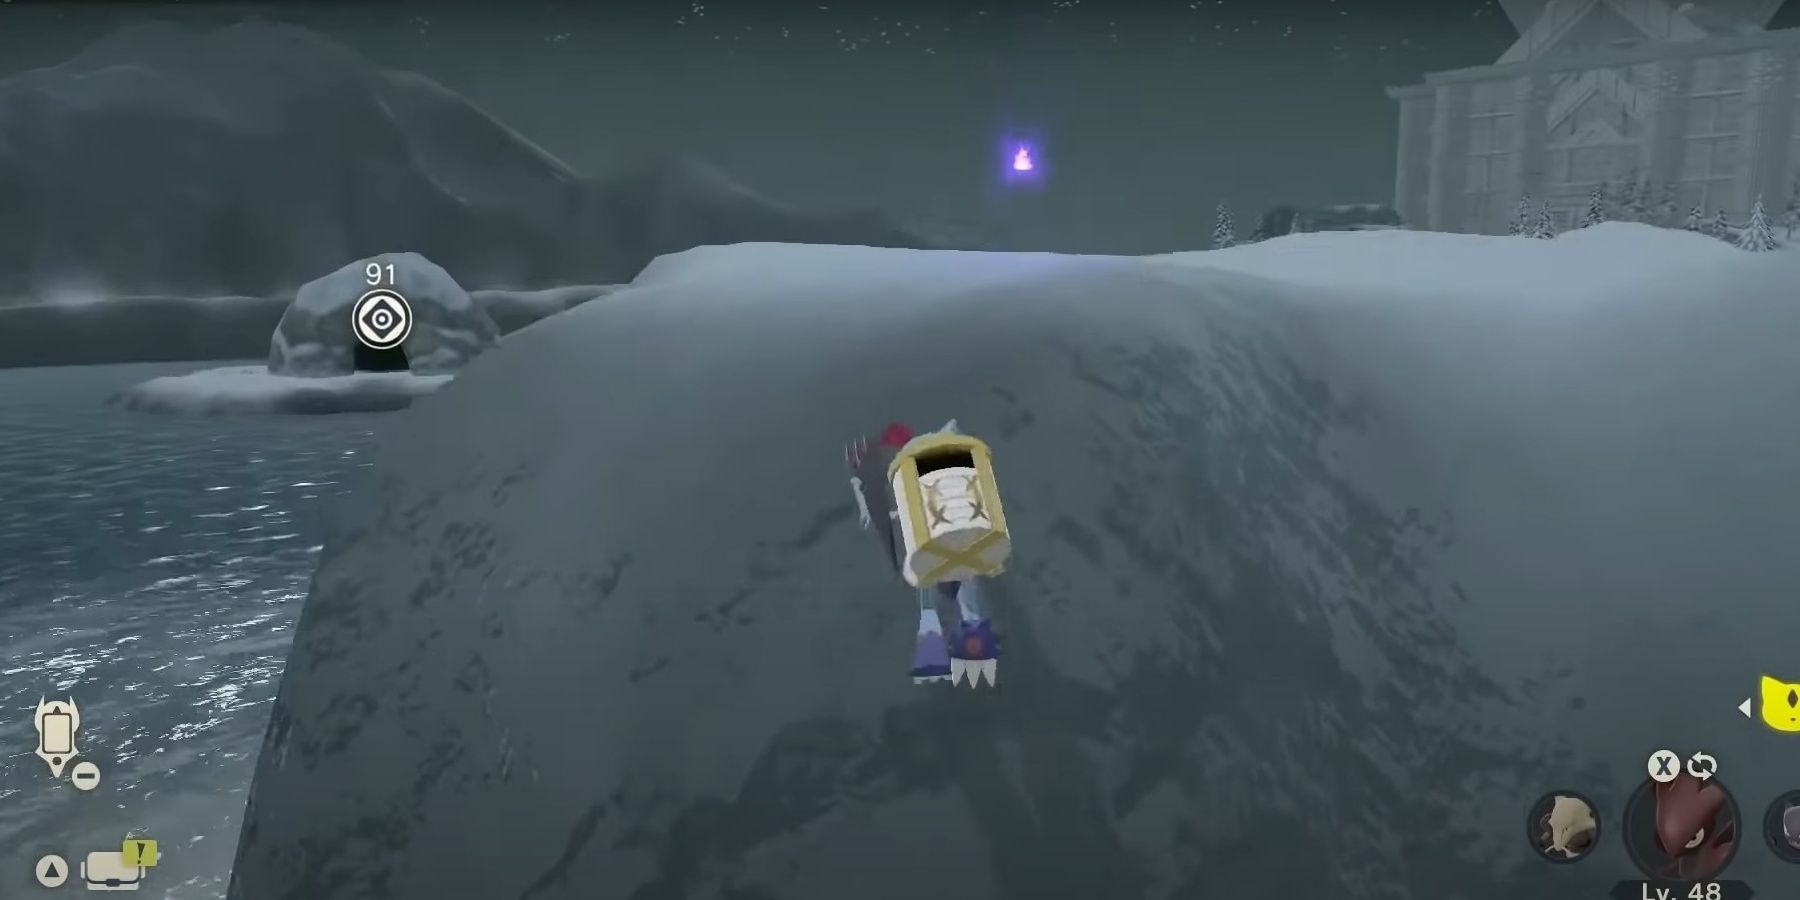 The Pokemon Legends Arceus character finds a wisp next to the Lake Acuity waterfall near the Snowpoint Temple and rock hut in Alabaster Icelands.